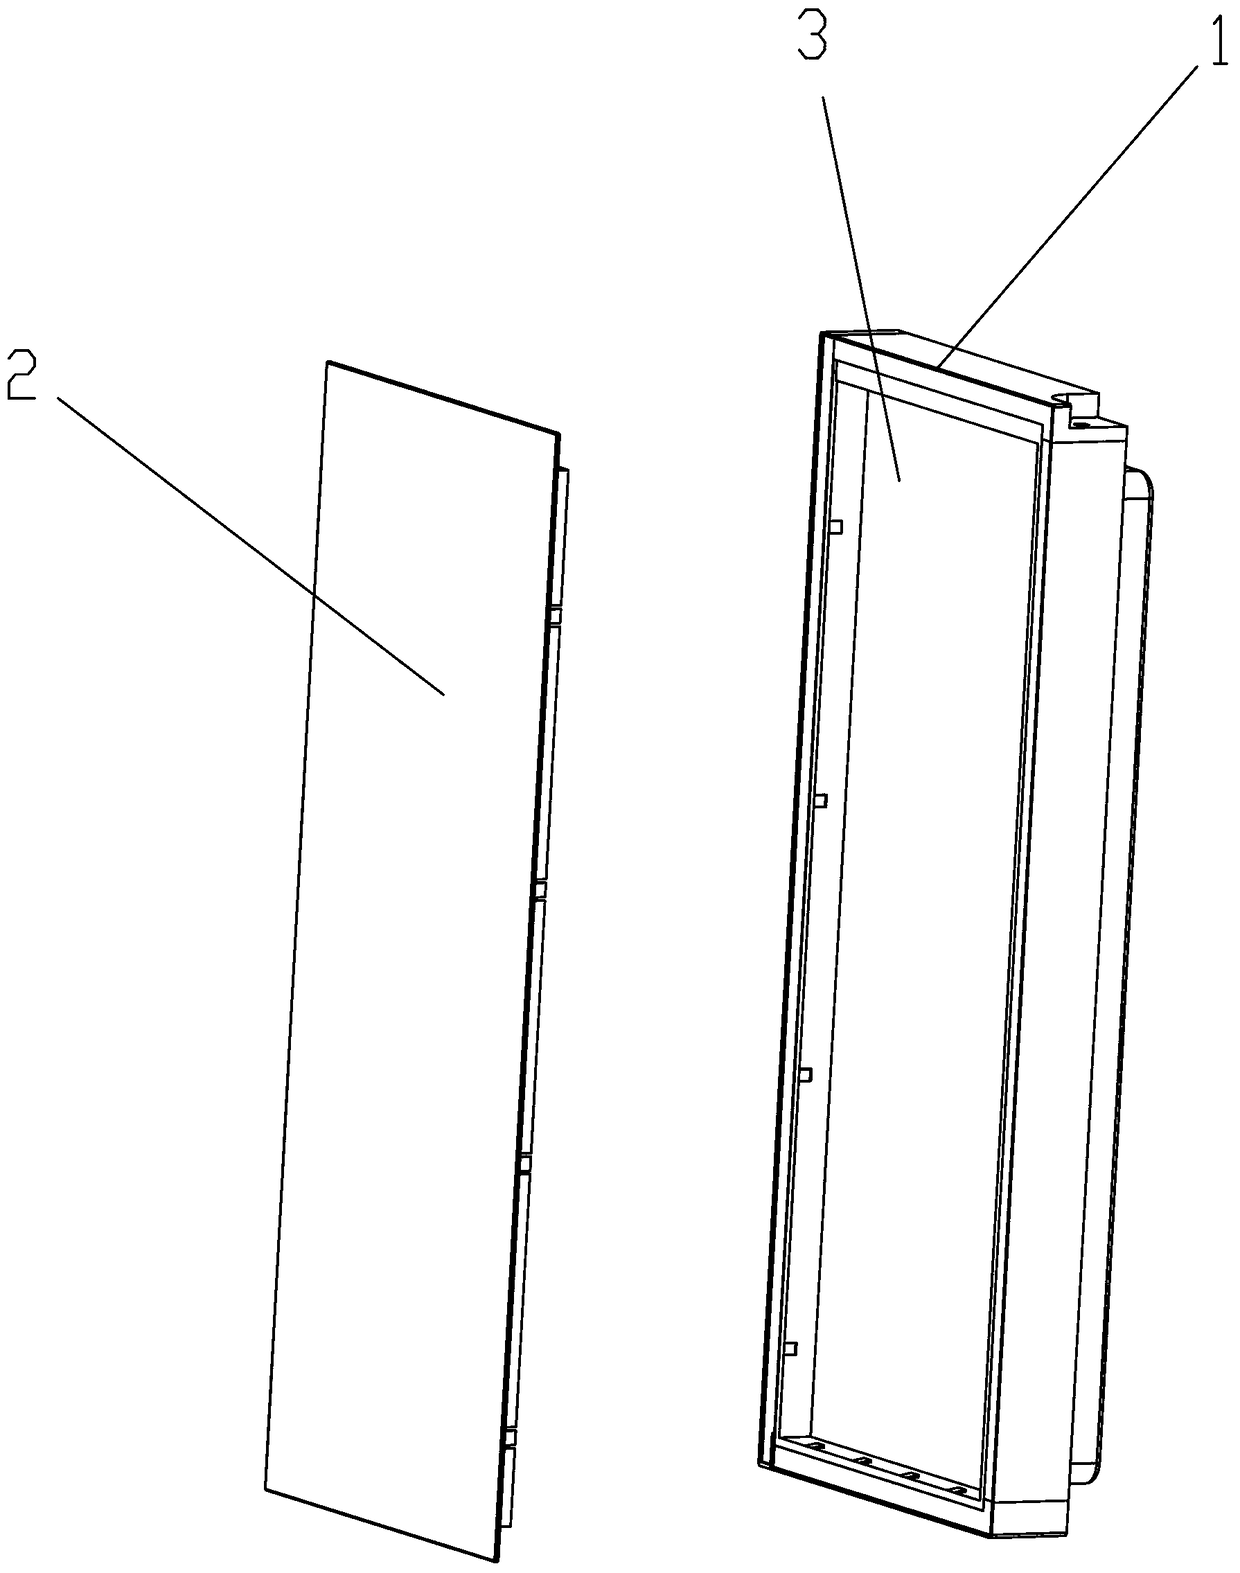 Display screen assembly connecting structure for household electrical appliance products